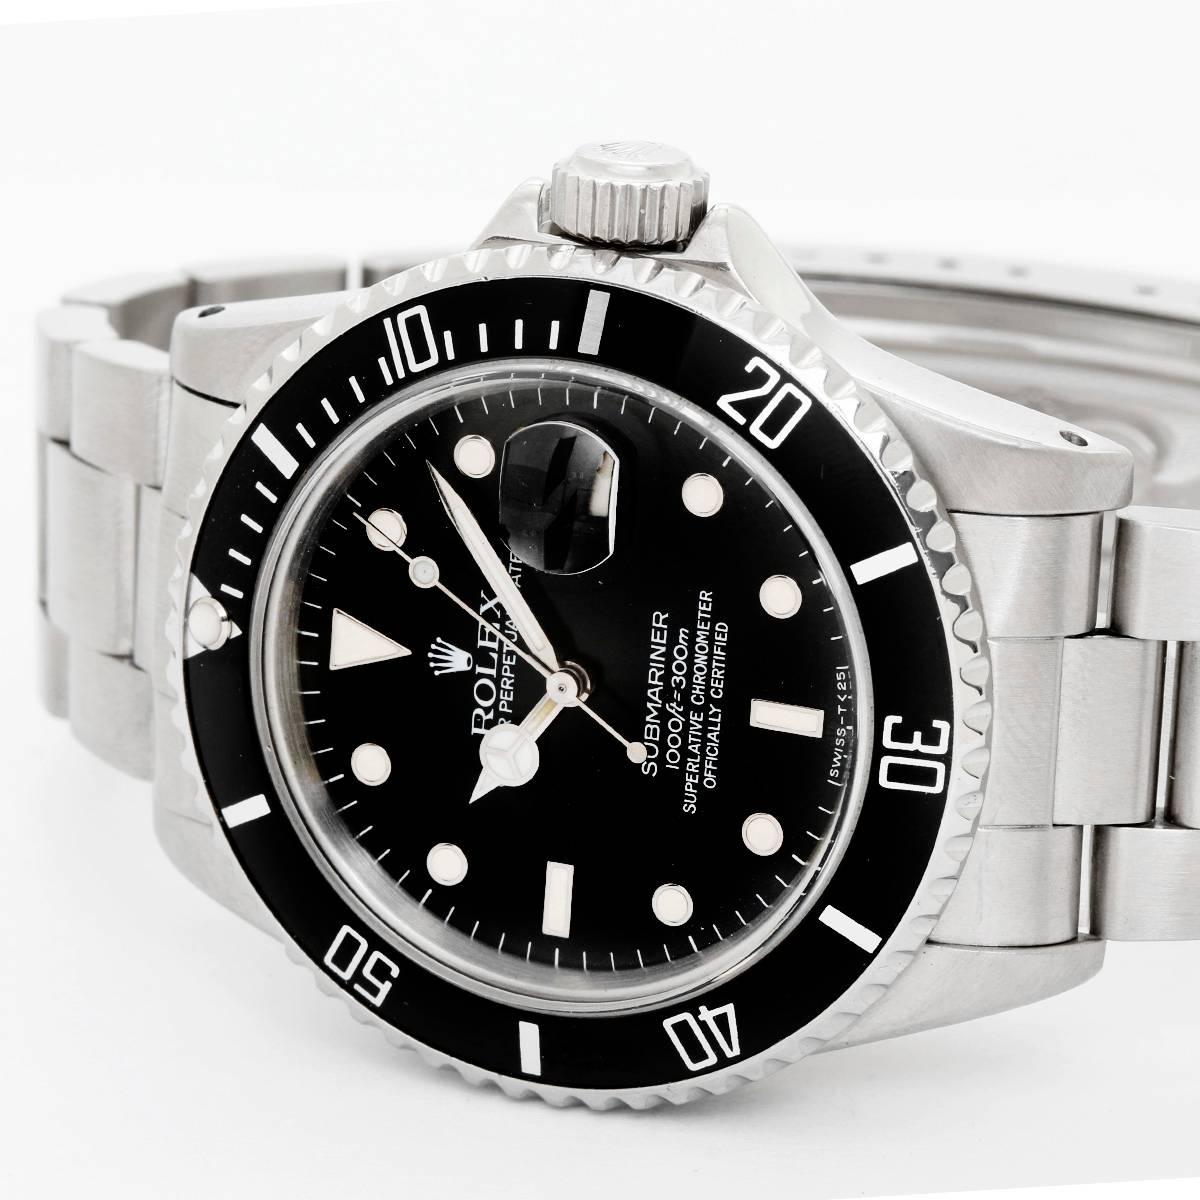 Rolex Submariner 16610 Stainless Steel Men's Diver Watch -  Automatic winding, 31 jewels, Quickset, sapphire crystal. Stainless steel case with rotating bezel with black insert  (40mm diameter). Black dial with luminous hour markers. Stainless steel